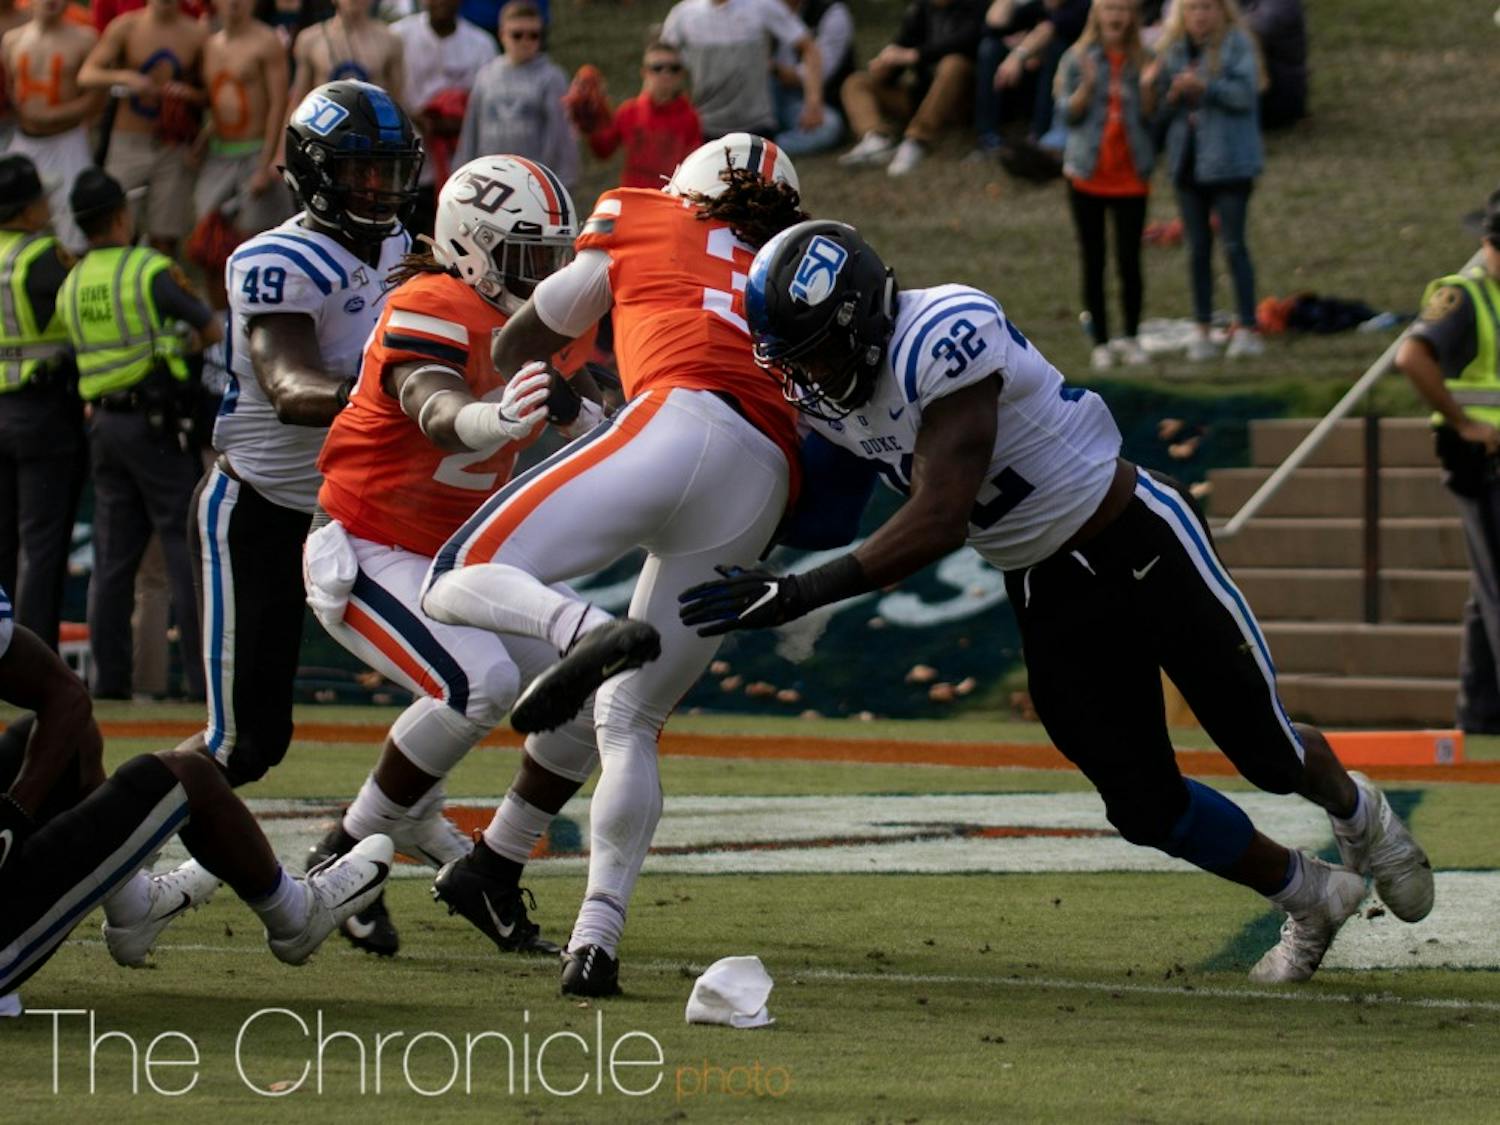 Brandon Hill and the Blue Devils will need to bounce back against North Carolina.